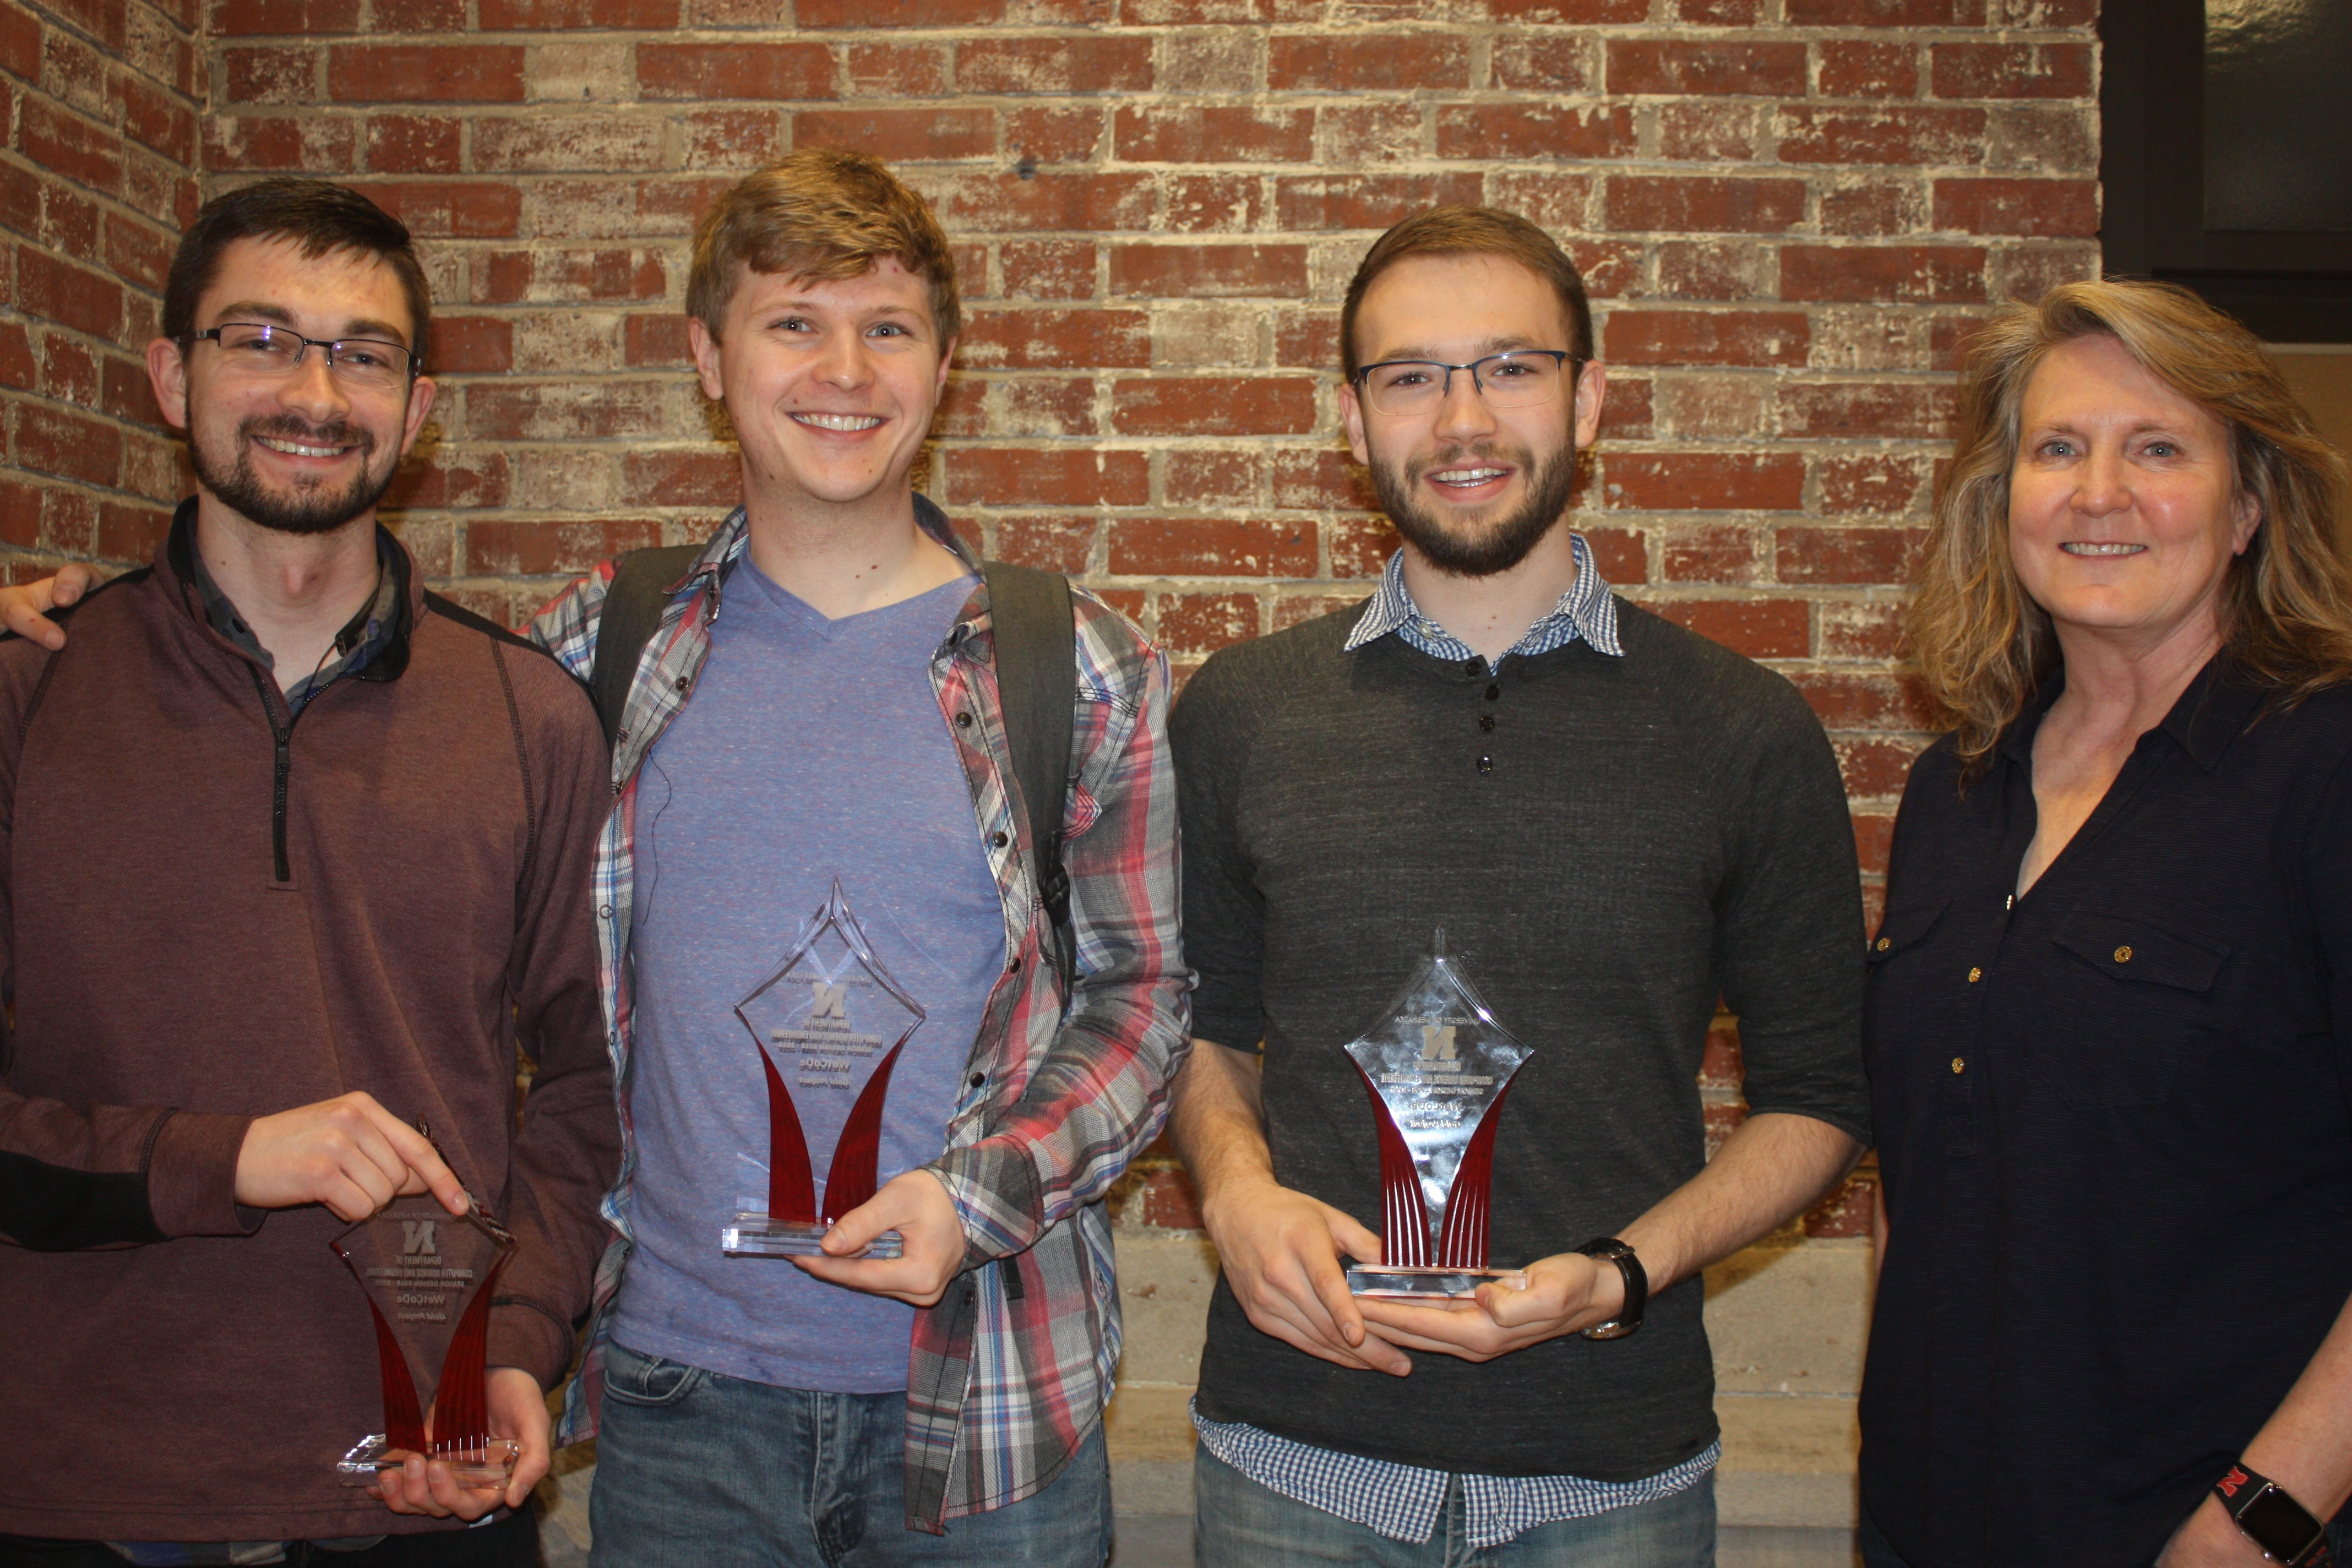 Gold Award team members Tyler Barker, Alex Enersen, and Colton Harper with project manager Melanie Kugler-Wright.